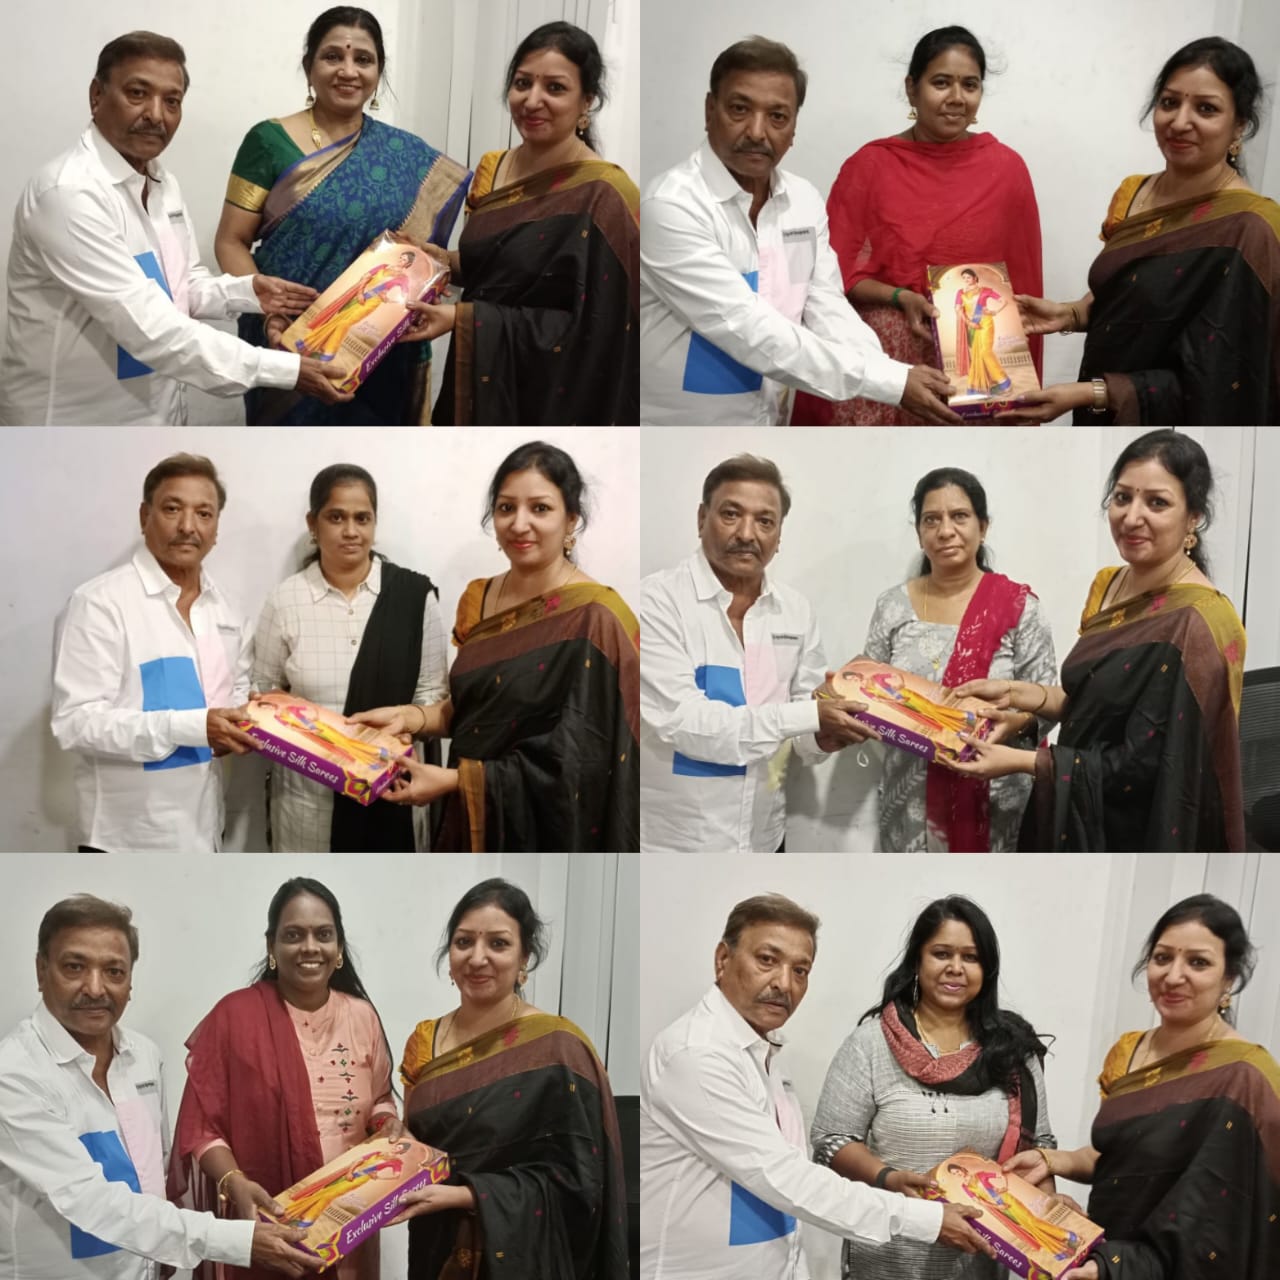 Actor Jai gifted sarees to all female journalists on Womens Day